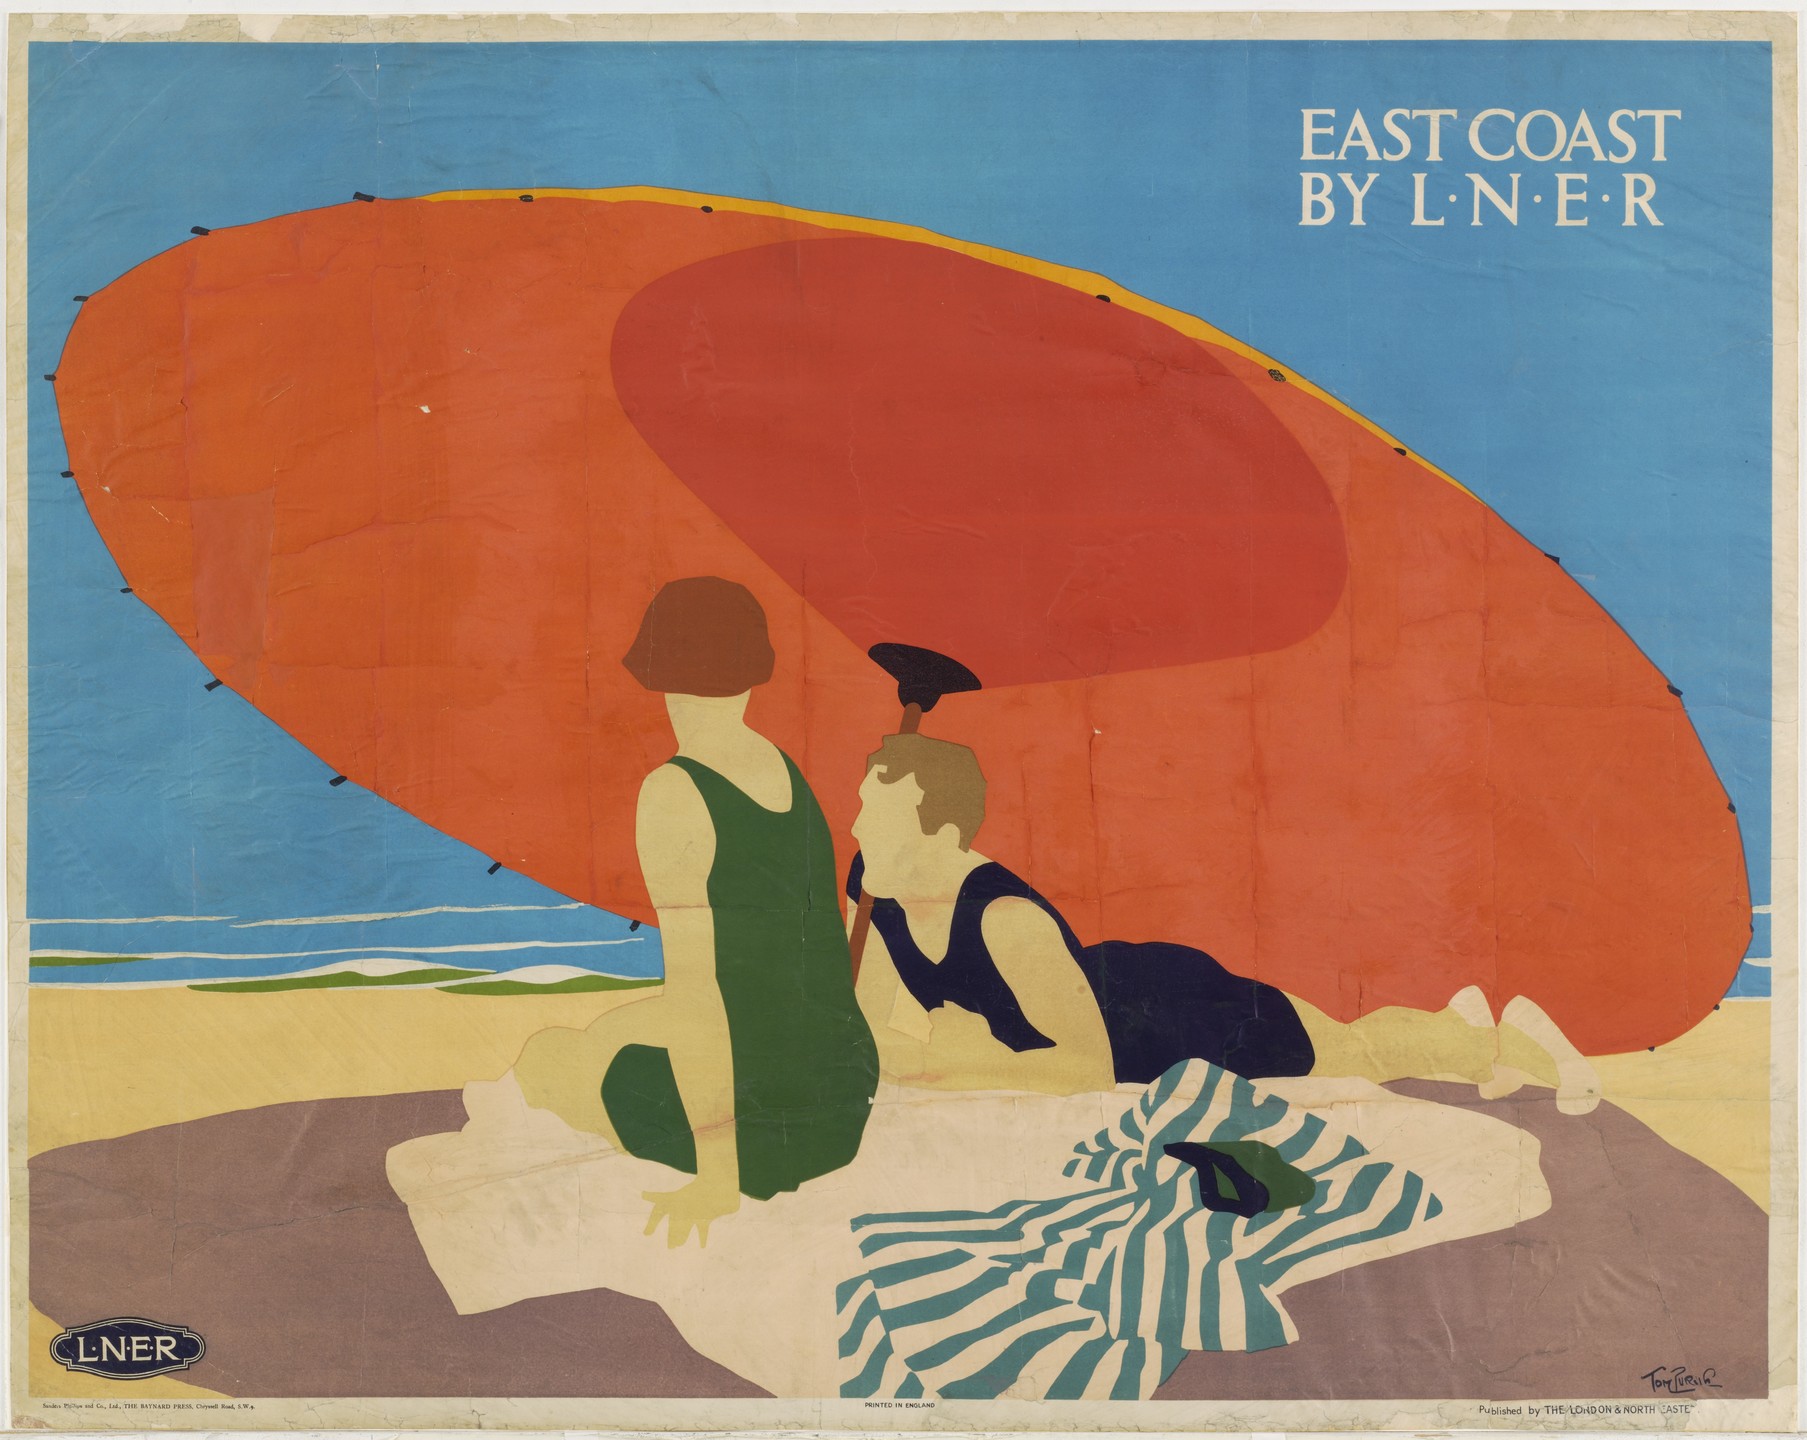 lithographic image of a large red beach umbrella underneath which two people curl up in the shade